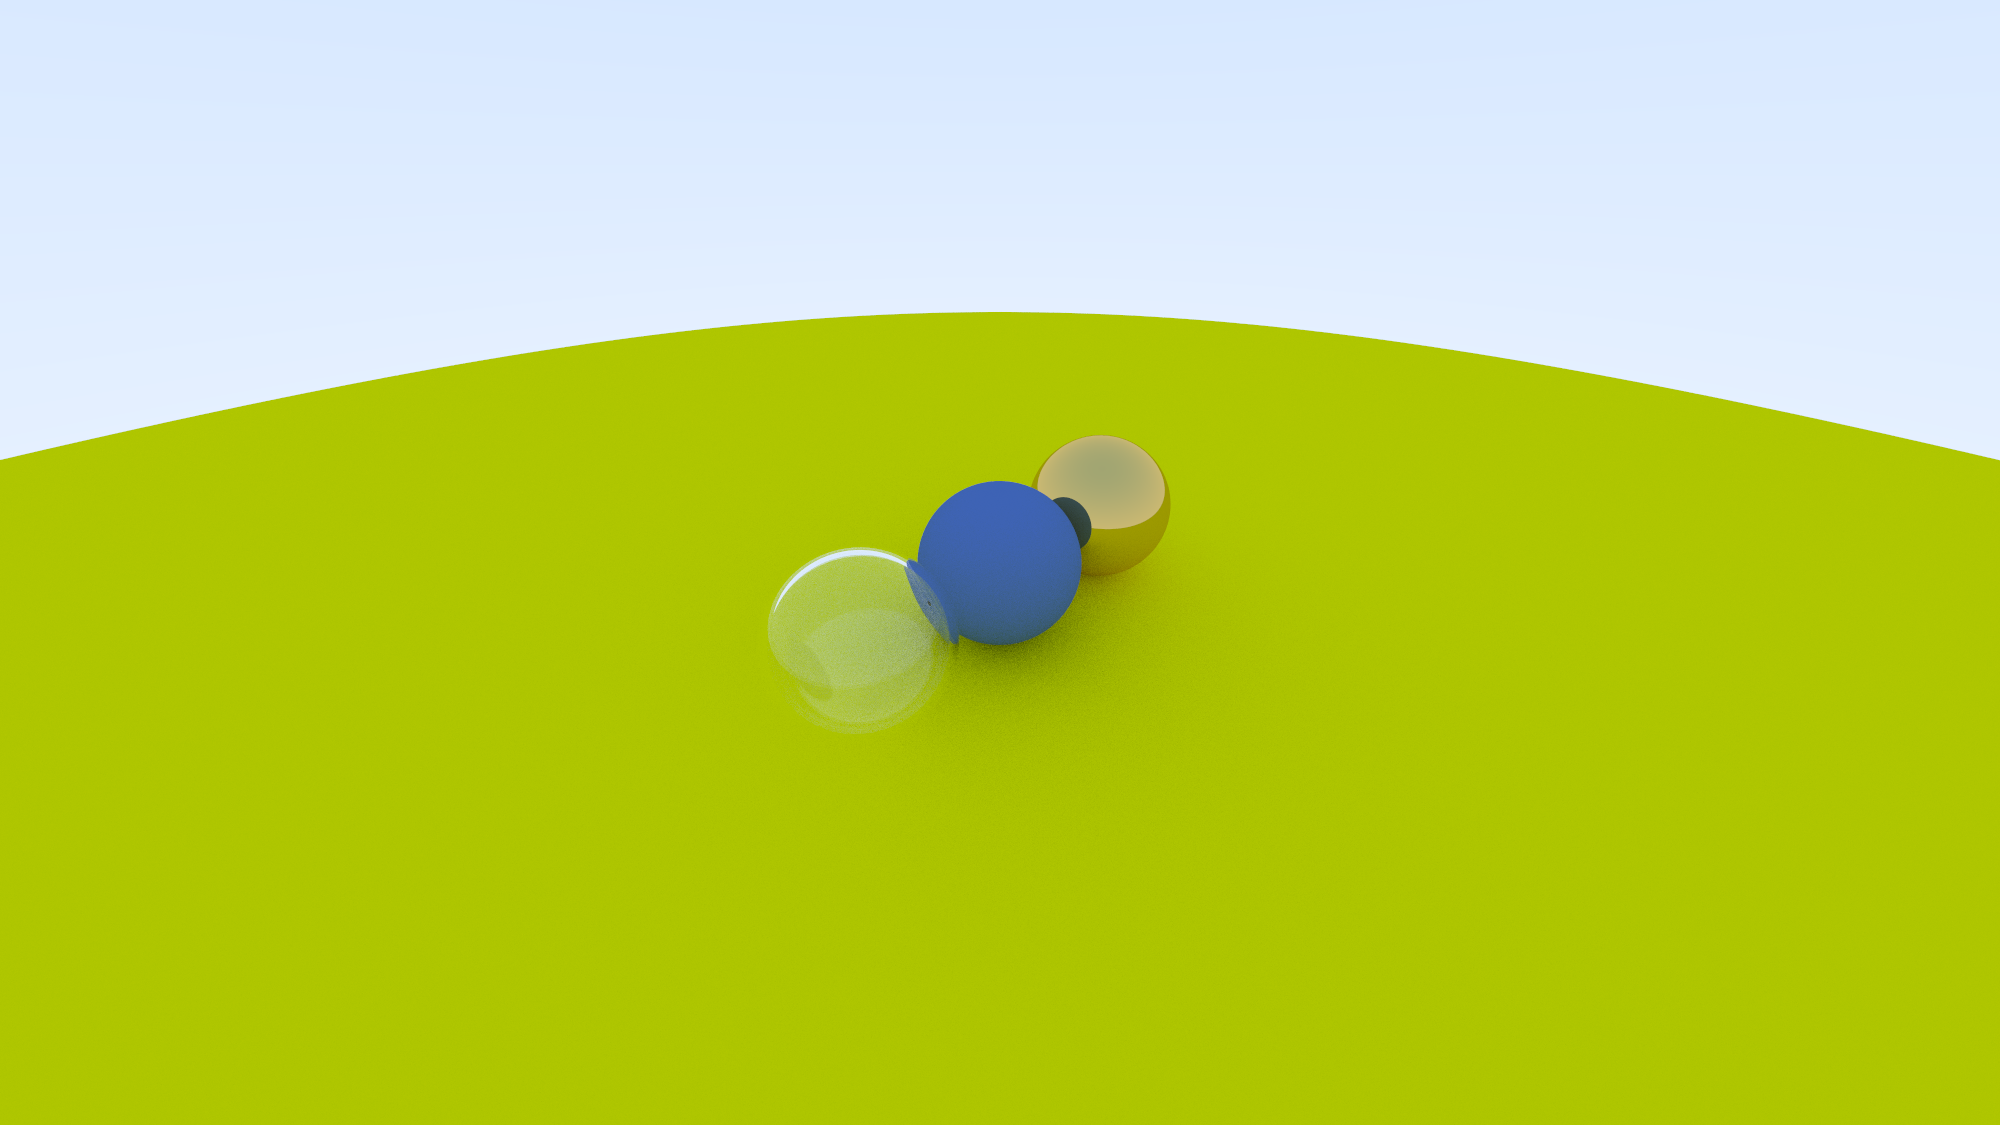 Distant View of Spheres with Multiple Materials